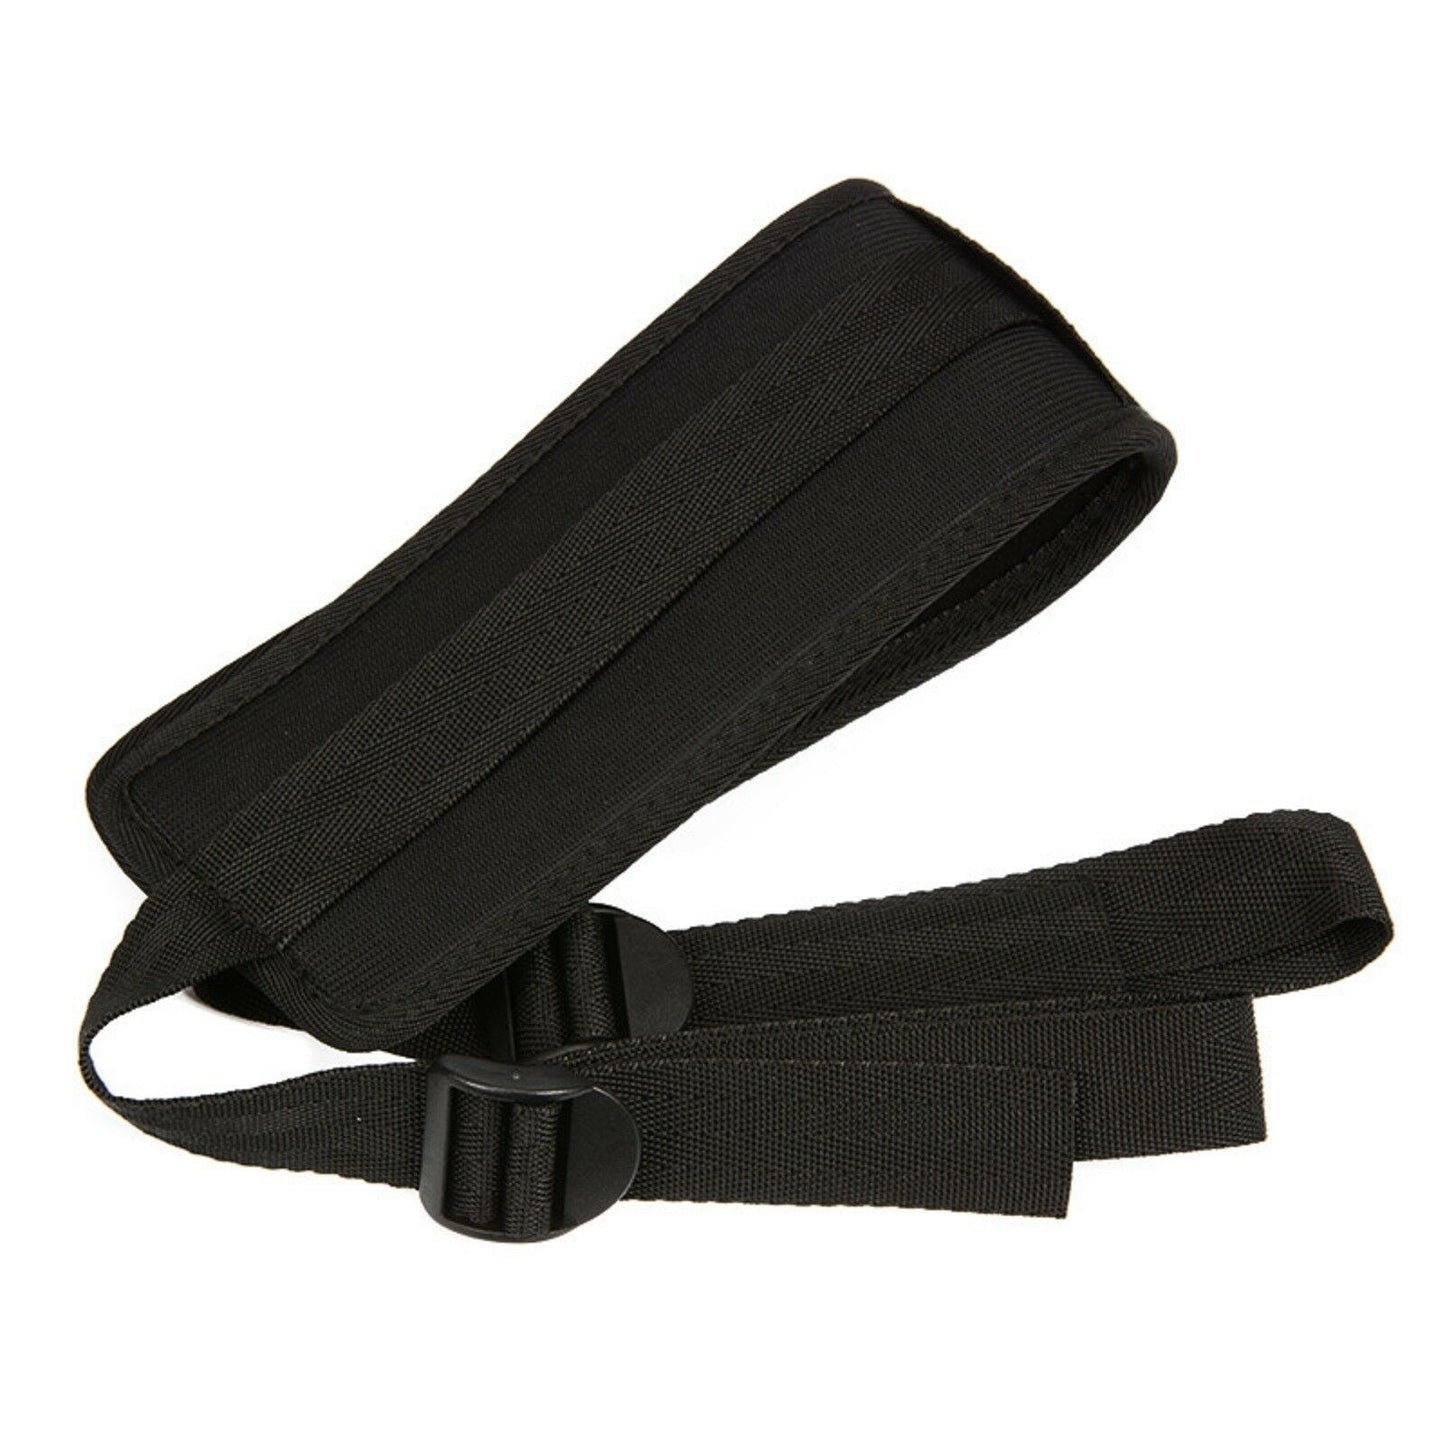 Doggy Style Strap Support Harness Bondage Restraint Swing Strap Couples Sex Toy